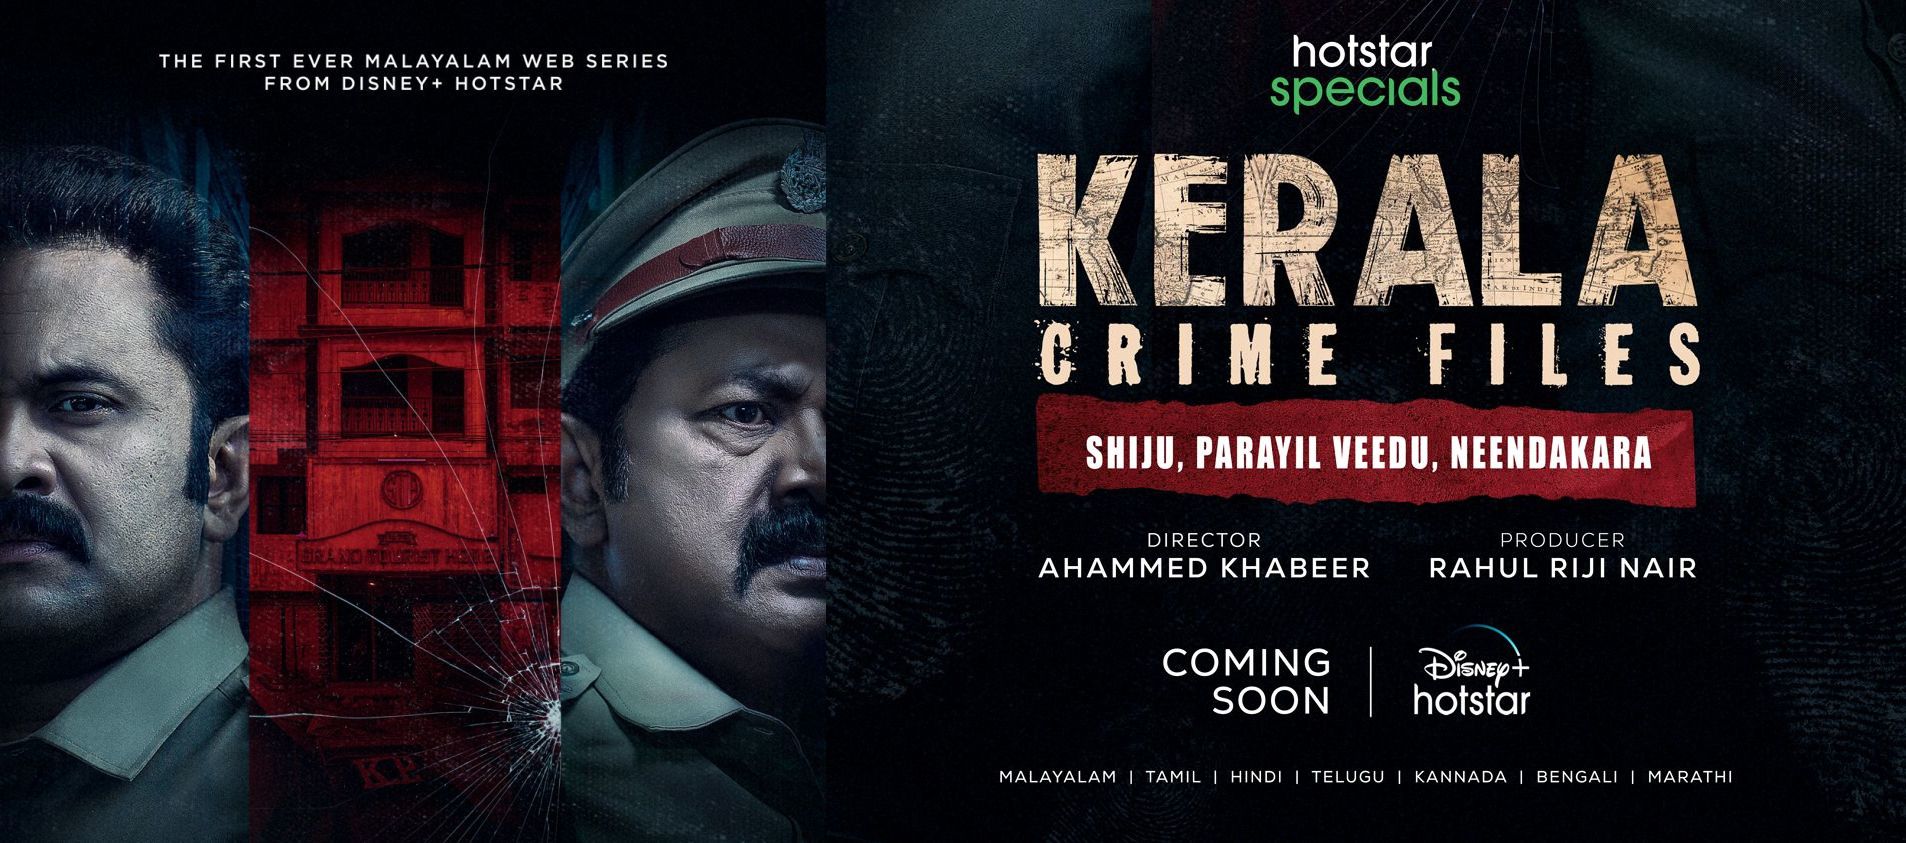 Thel Malayalam Movie Online Streaming Started on Amazon Prime Video - Horror Film 8